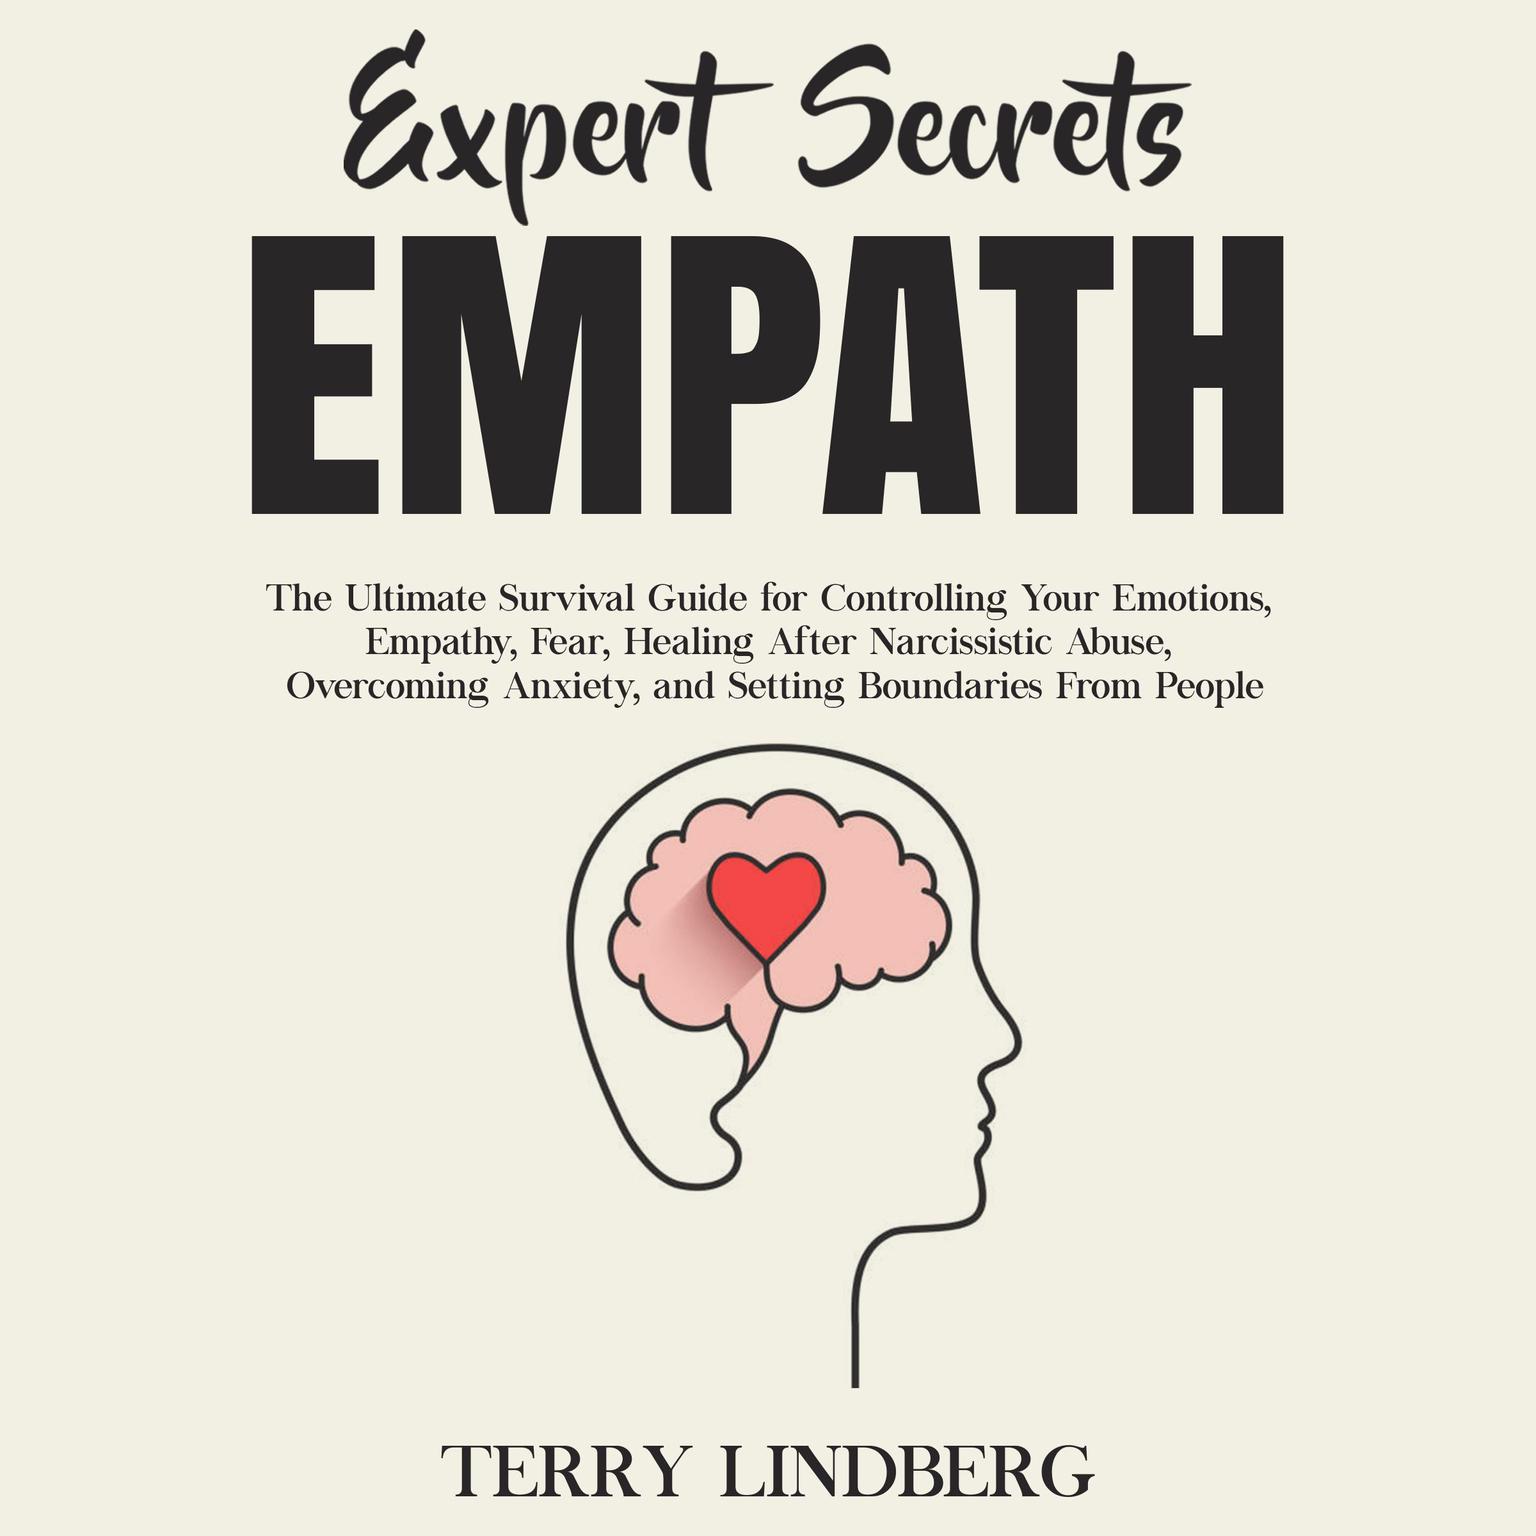 Expert Secrets – Empath: The Ultimate Survival Guide for Controlling Your Emotions, Empathy, Fear, Healing After Narcissistic Abuse, Overcoming Anxiety, and Setting Boundaries From People. Audiobook, by Terry Lindberg